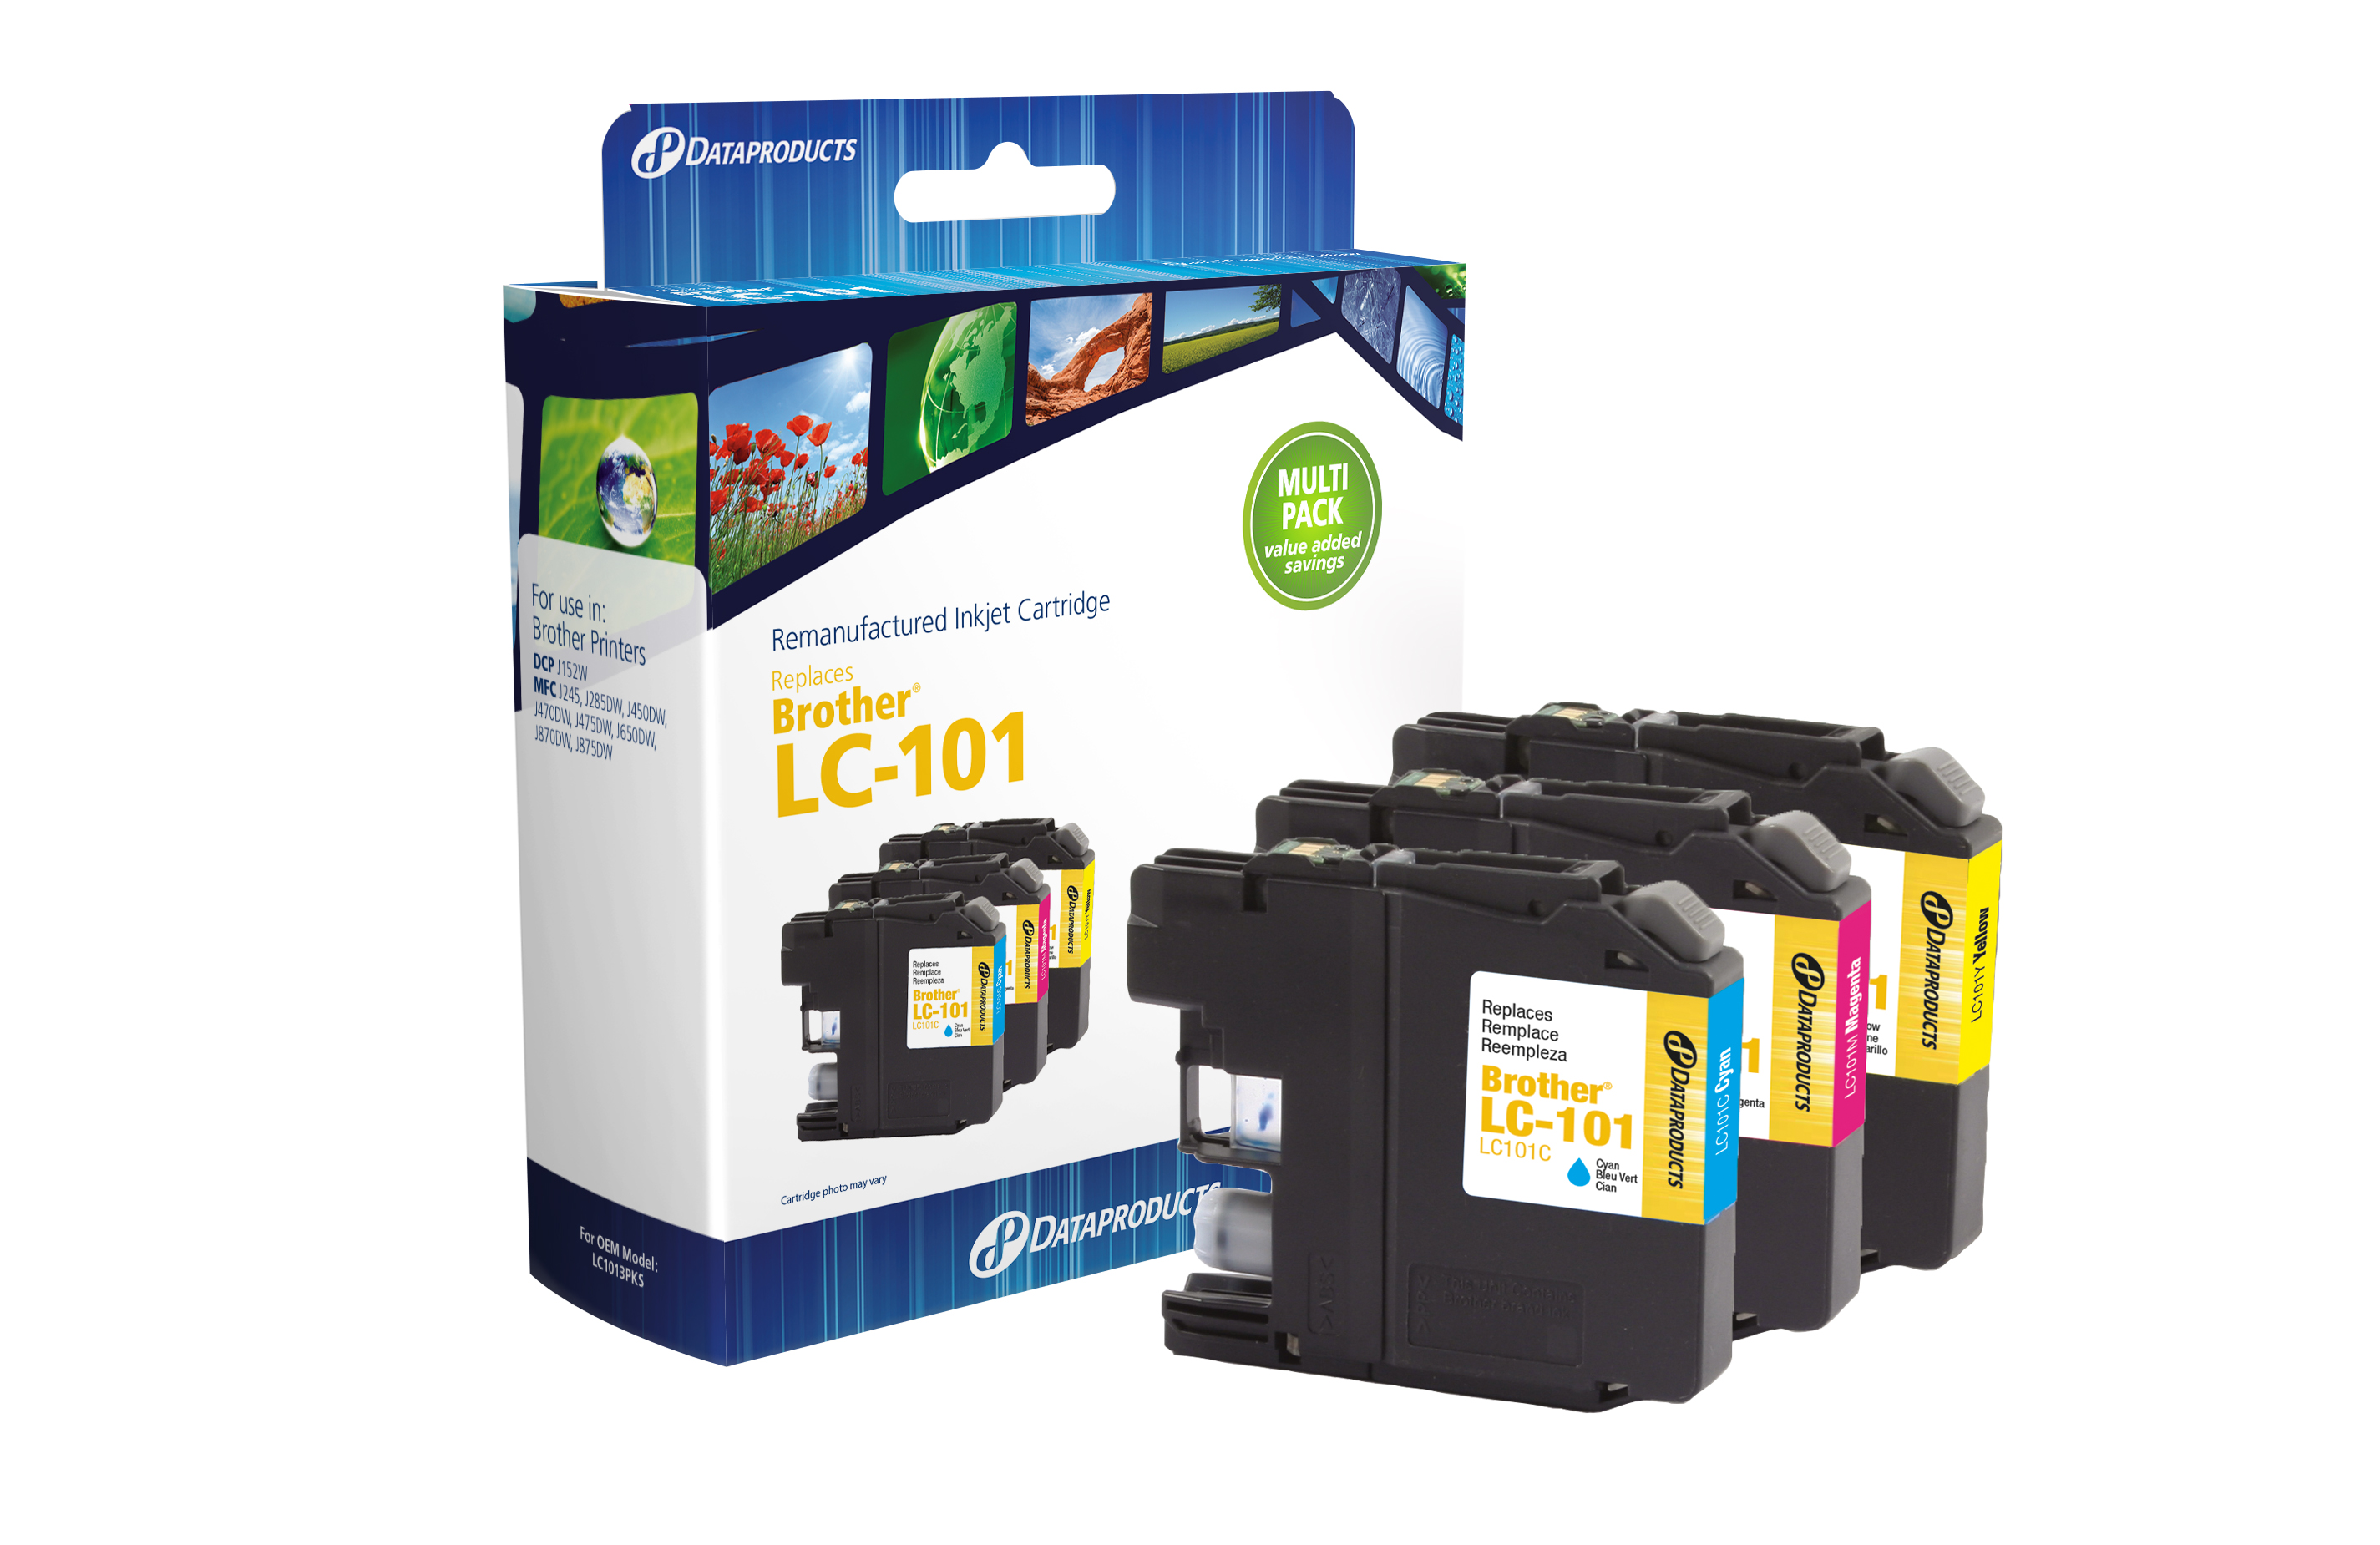 Dataproducts DPCLC101CMY Remanufactured Brother LC-101 Cyan/Magenta/Yellow Ink 3-Pack